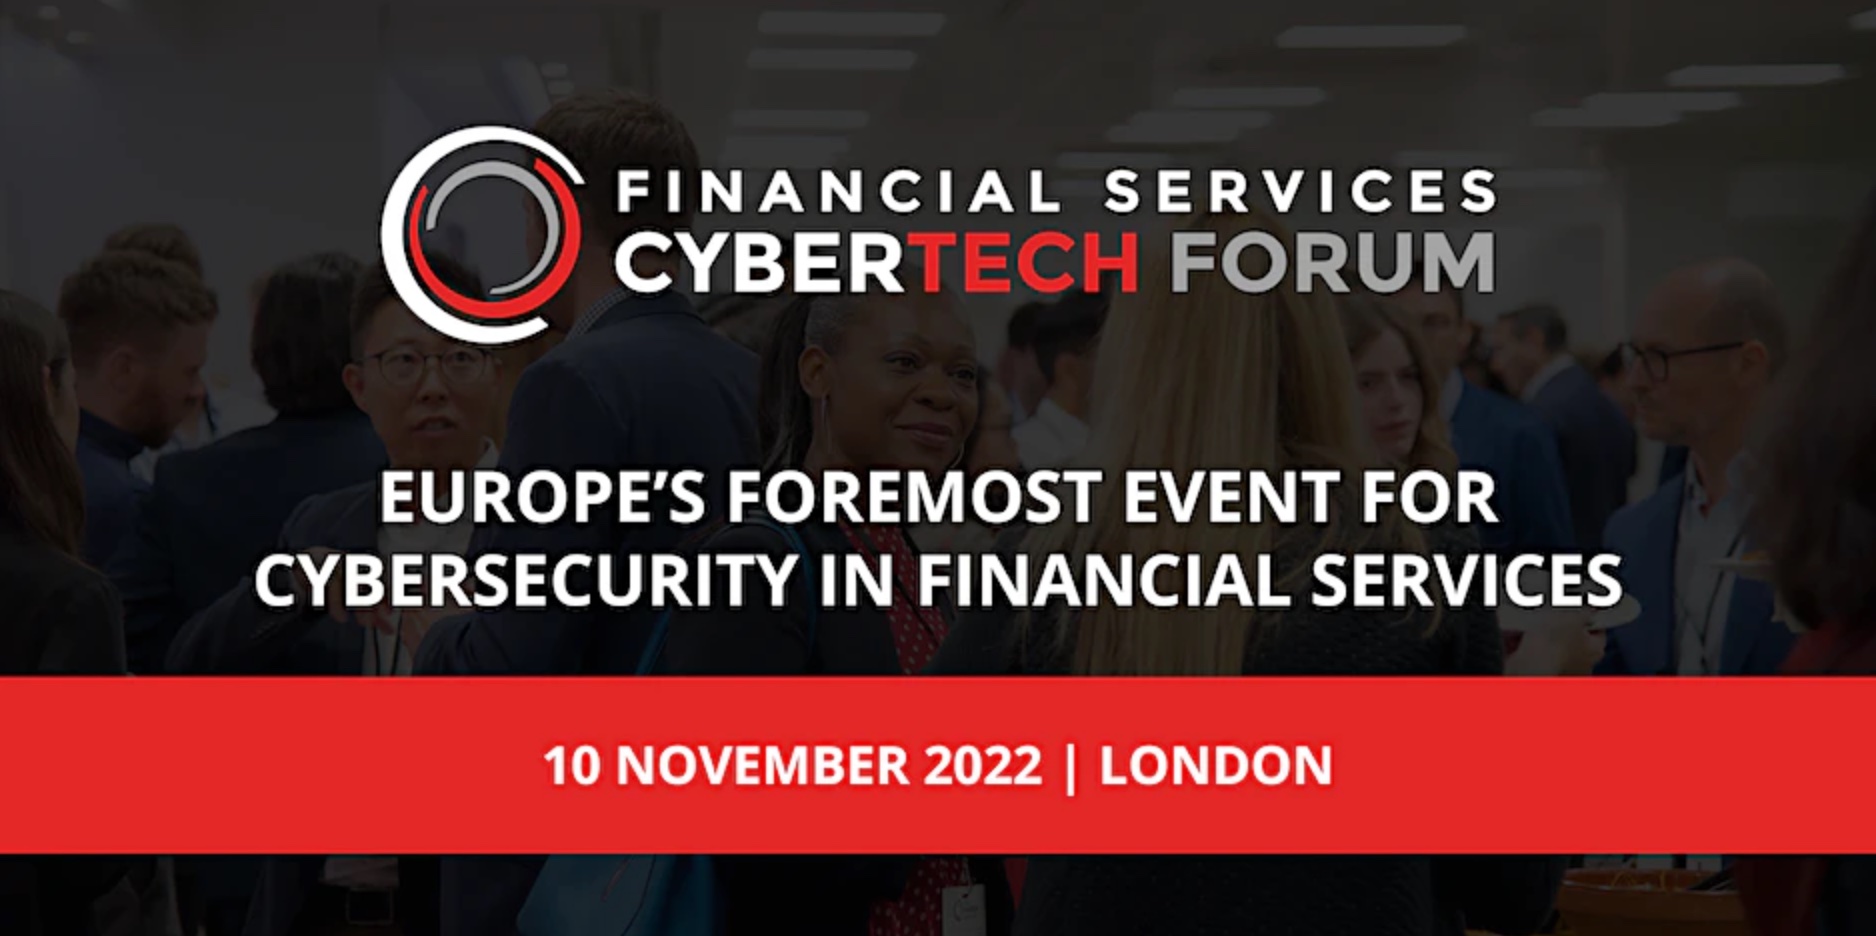 Financial Services Cyber Technology Forum 2022